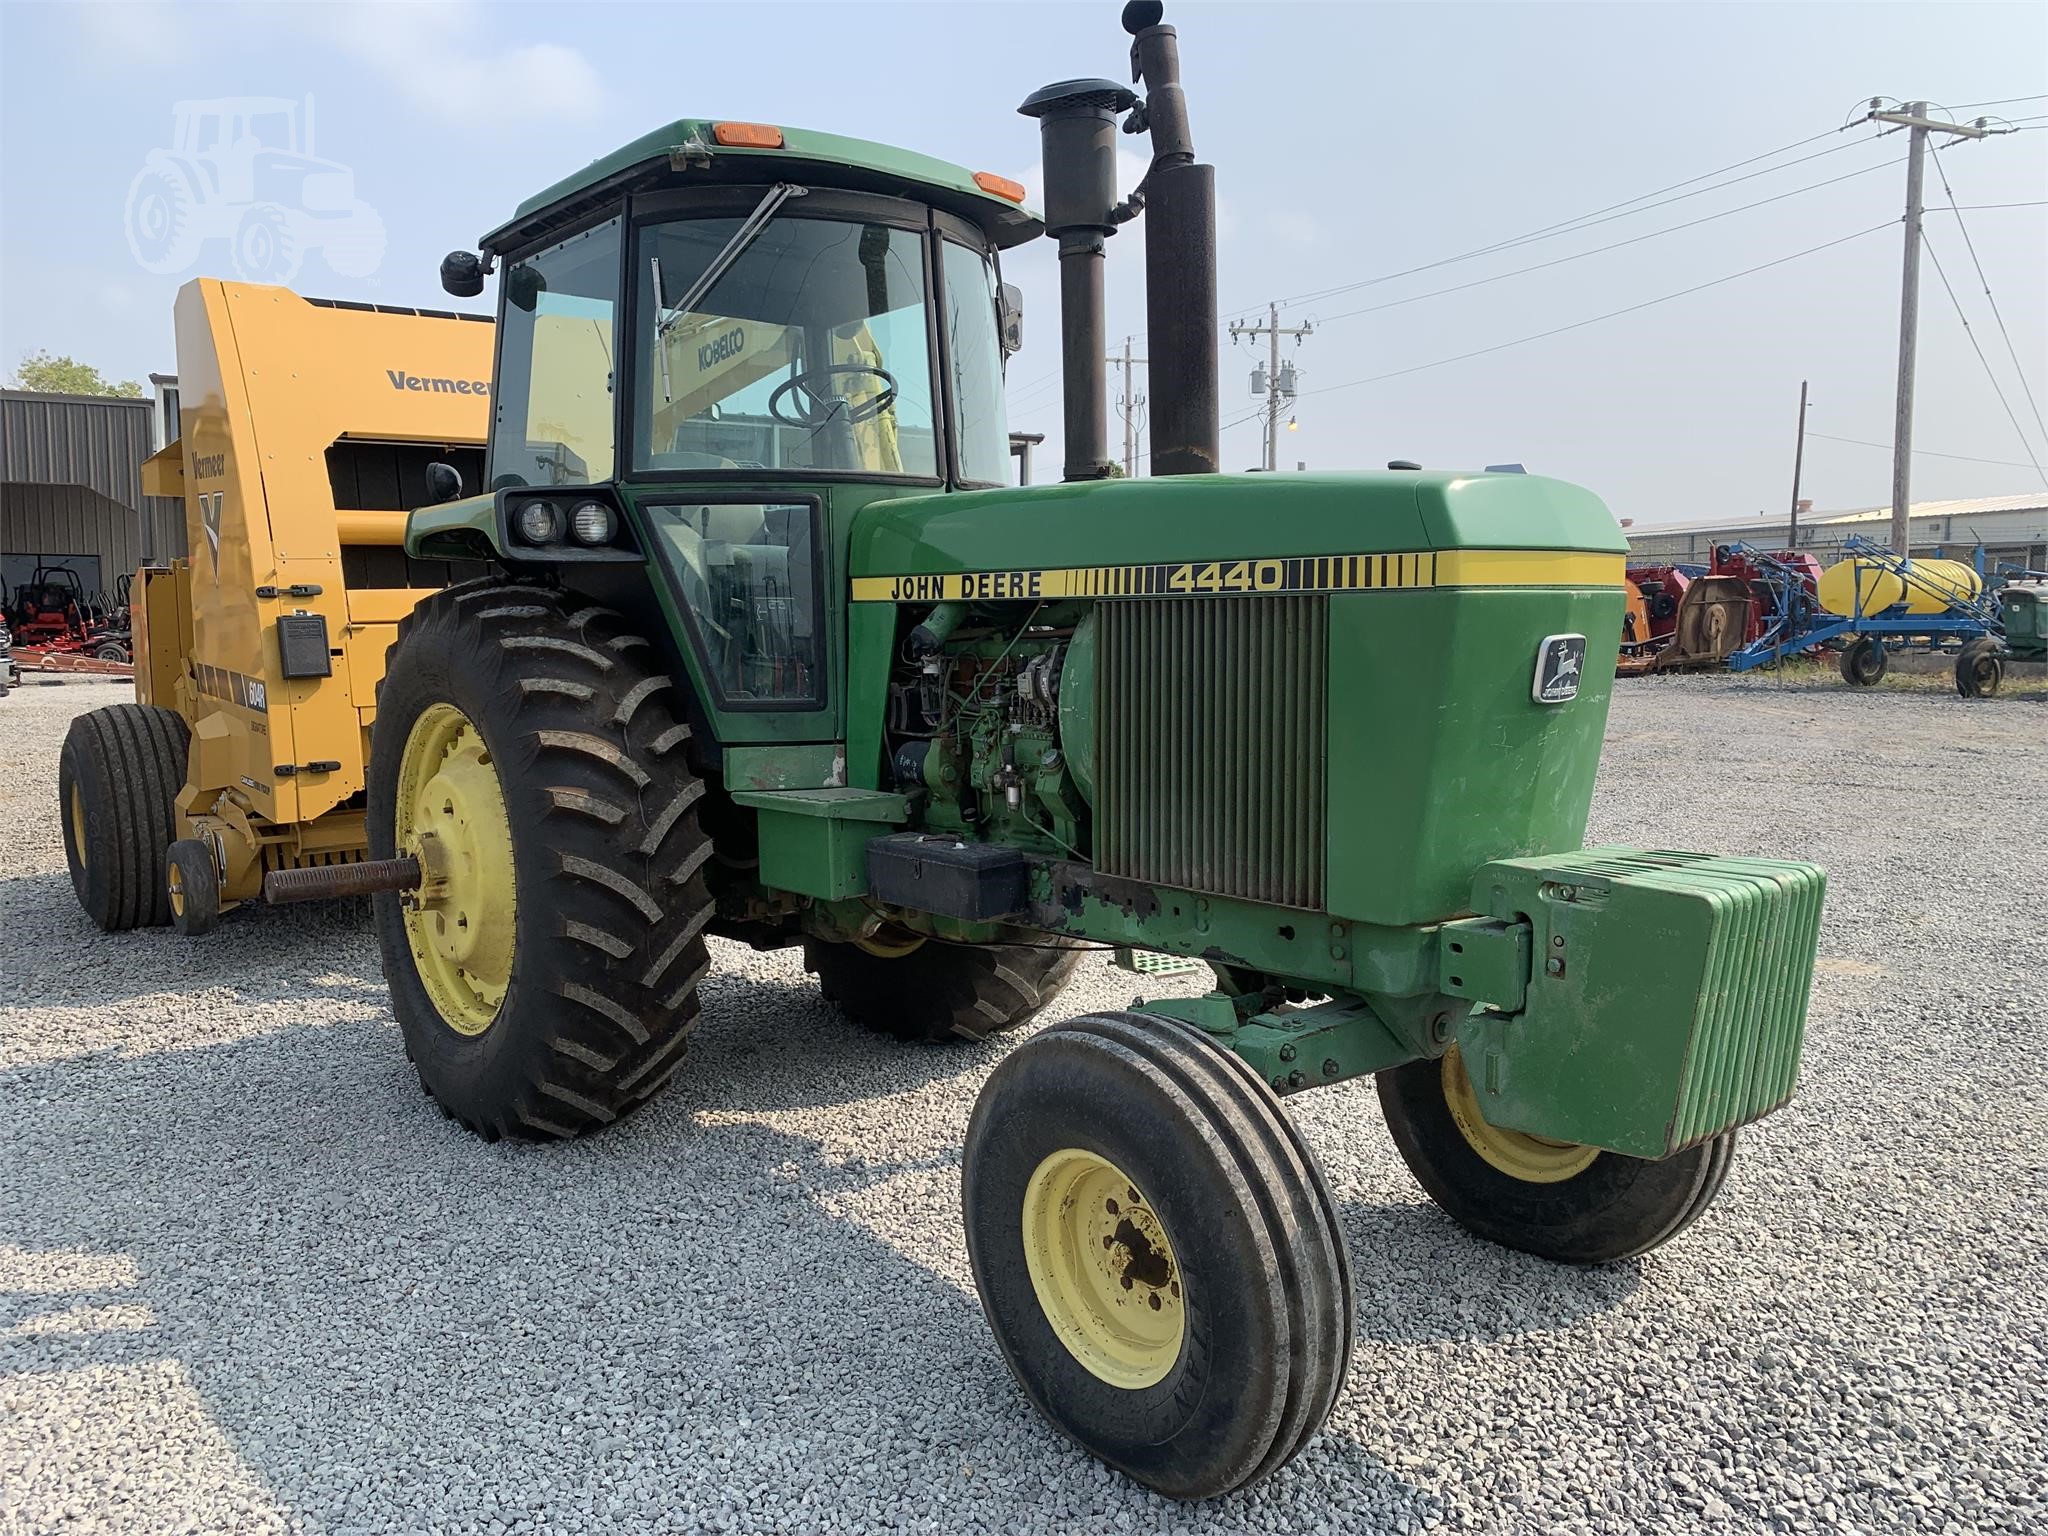 JOHN DEERE 4440 For Sale In Mcalester, Oklahoma | TractorHouse.com